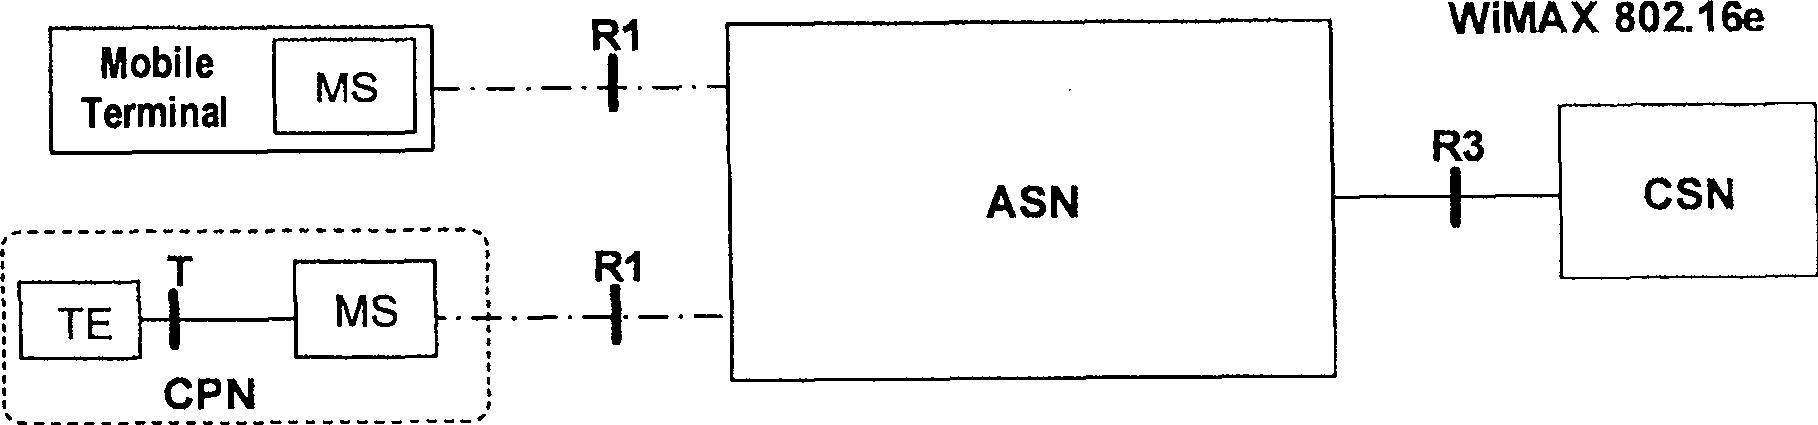 Method for interconnecting wide-band wireless access-in network and optical access-in wide-band network and system therefor